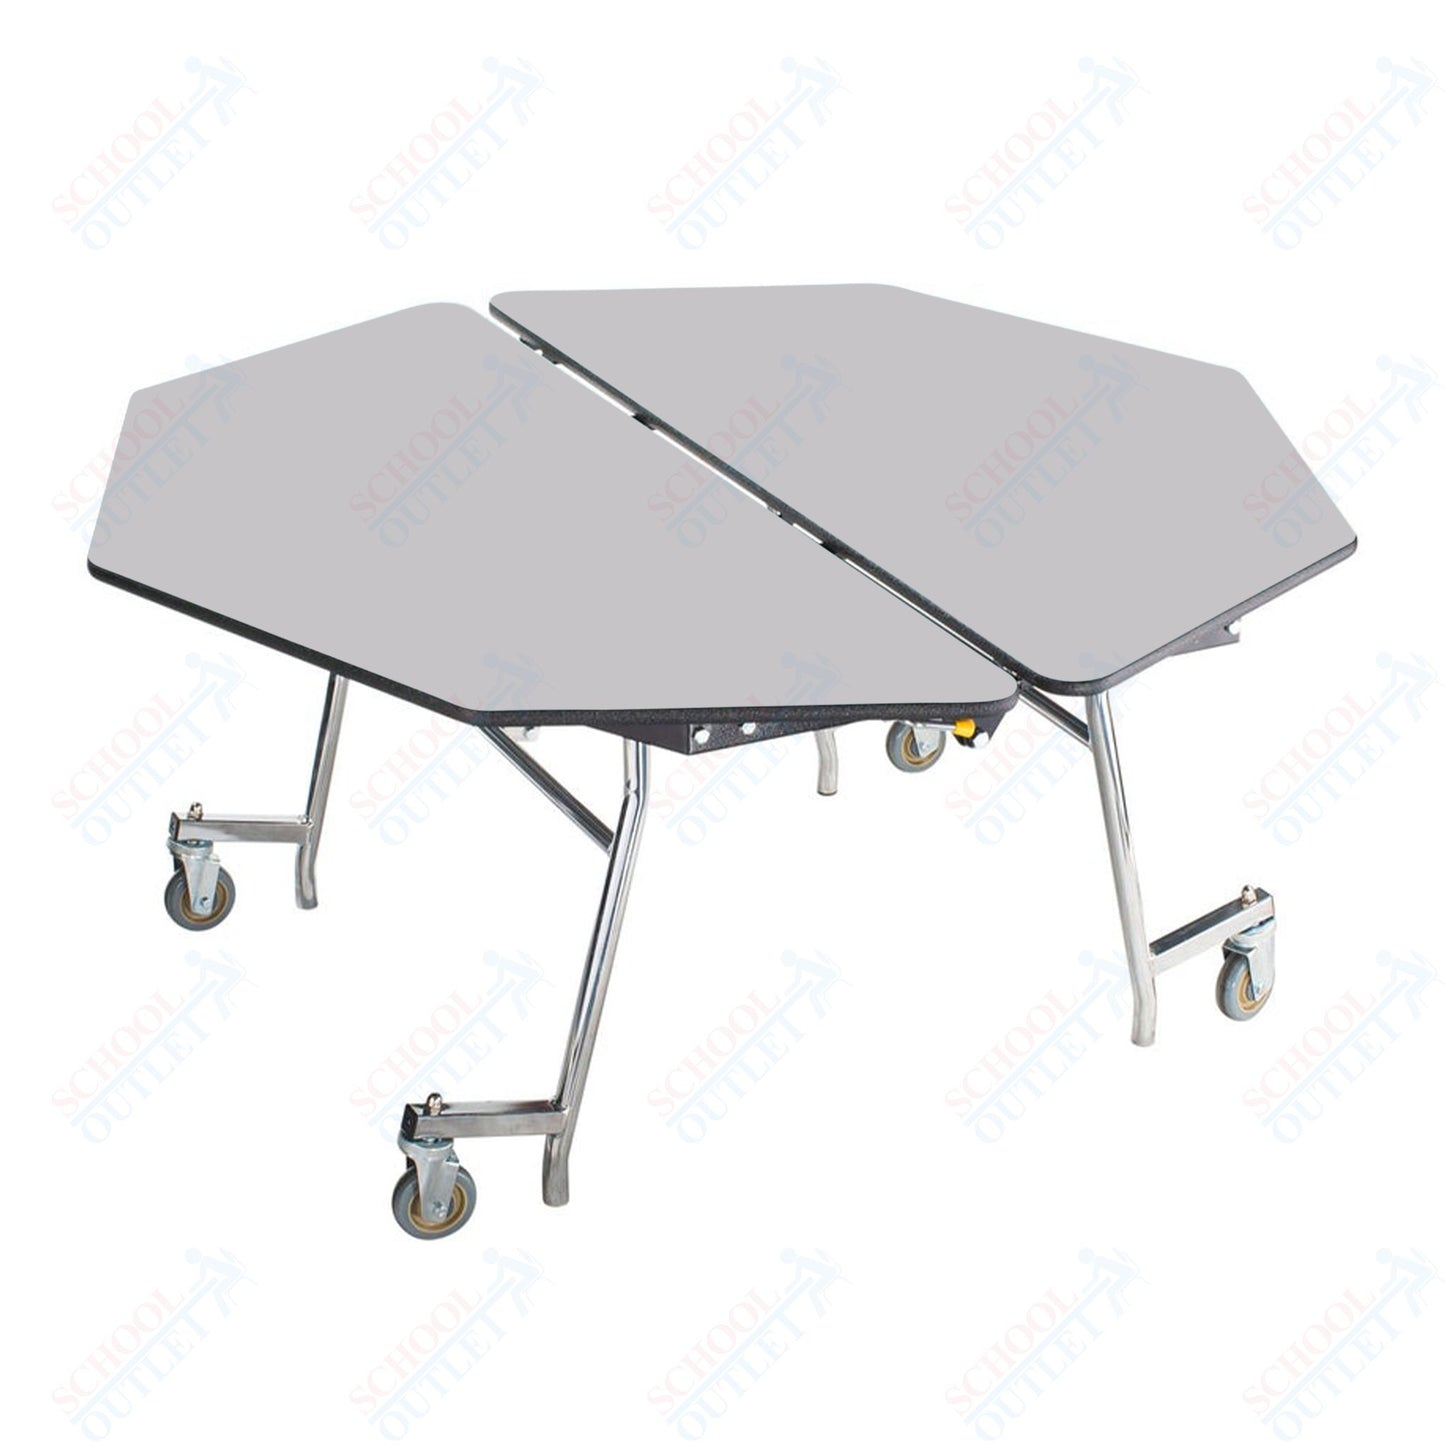 NPS Mobile Cafeteria Octagon Table Shape Unit - 60" W x 60" L (National Public Seating NPS-MT60O)